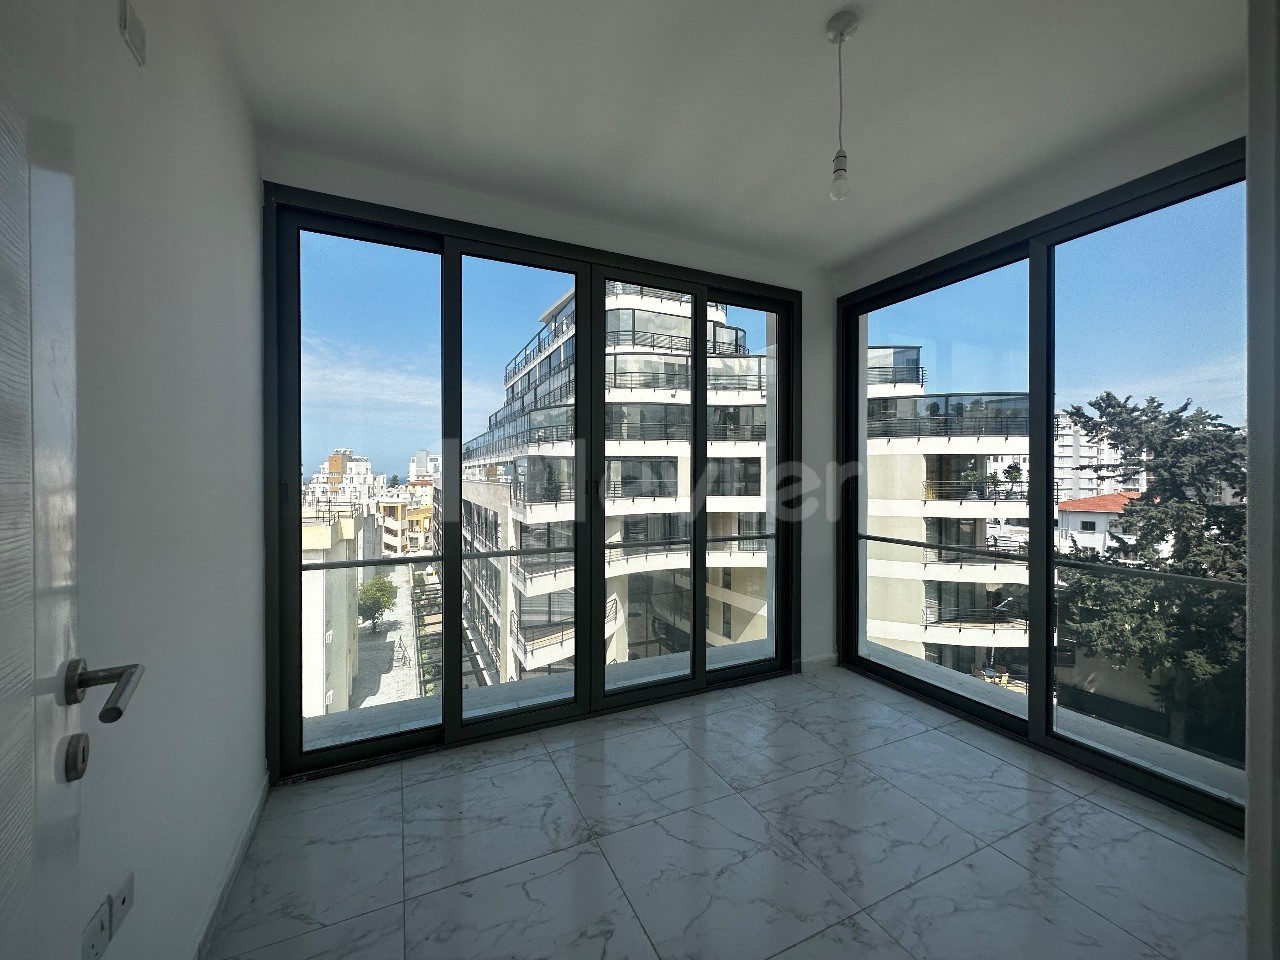 2+1 80 m2 LAST TWO APARTMENTS WITH COMMERCIAL PERMIT IN CENTER OF GIRNE